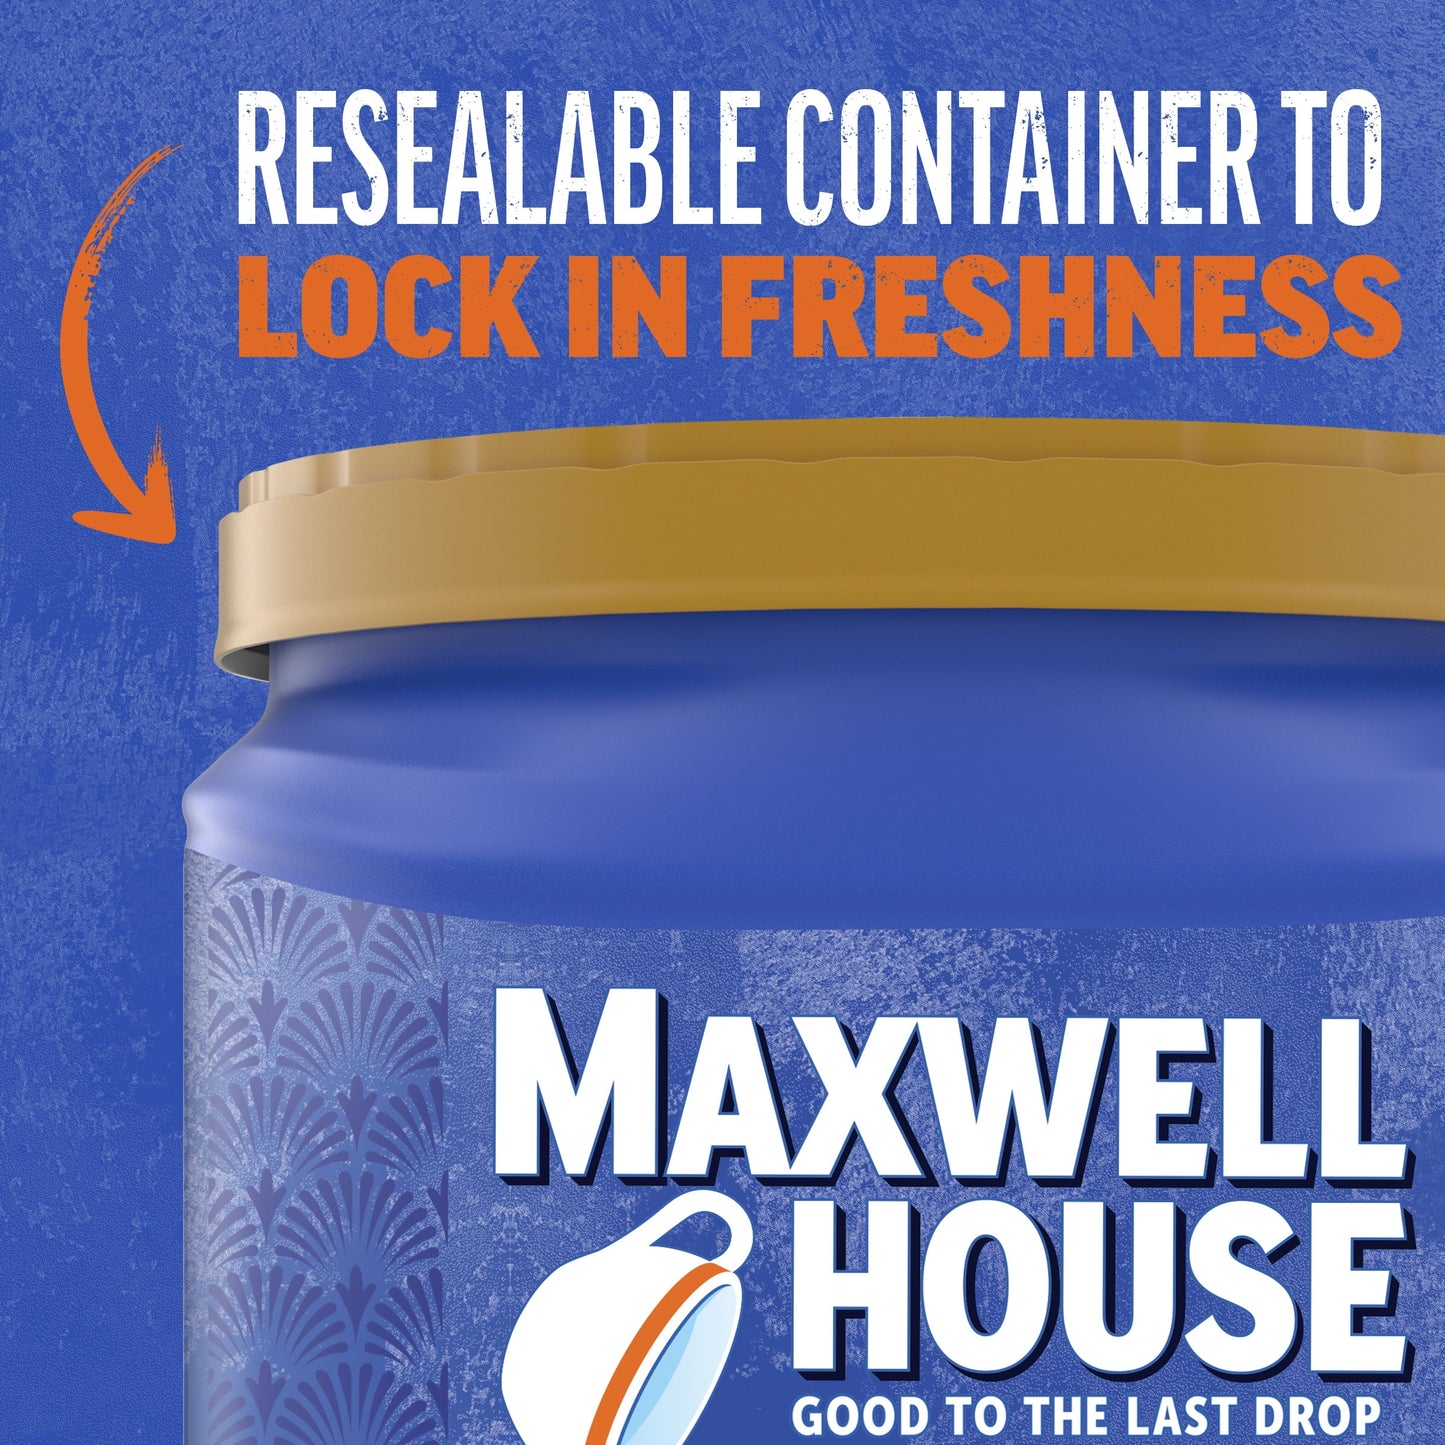 Maxwell House Dark French Roast Ground Coffee, 25.6 oz. Canister